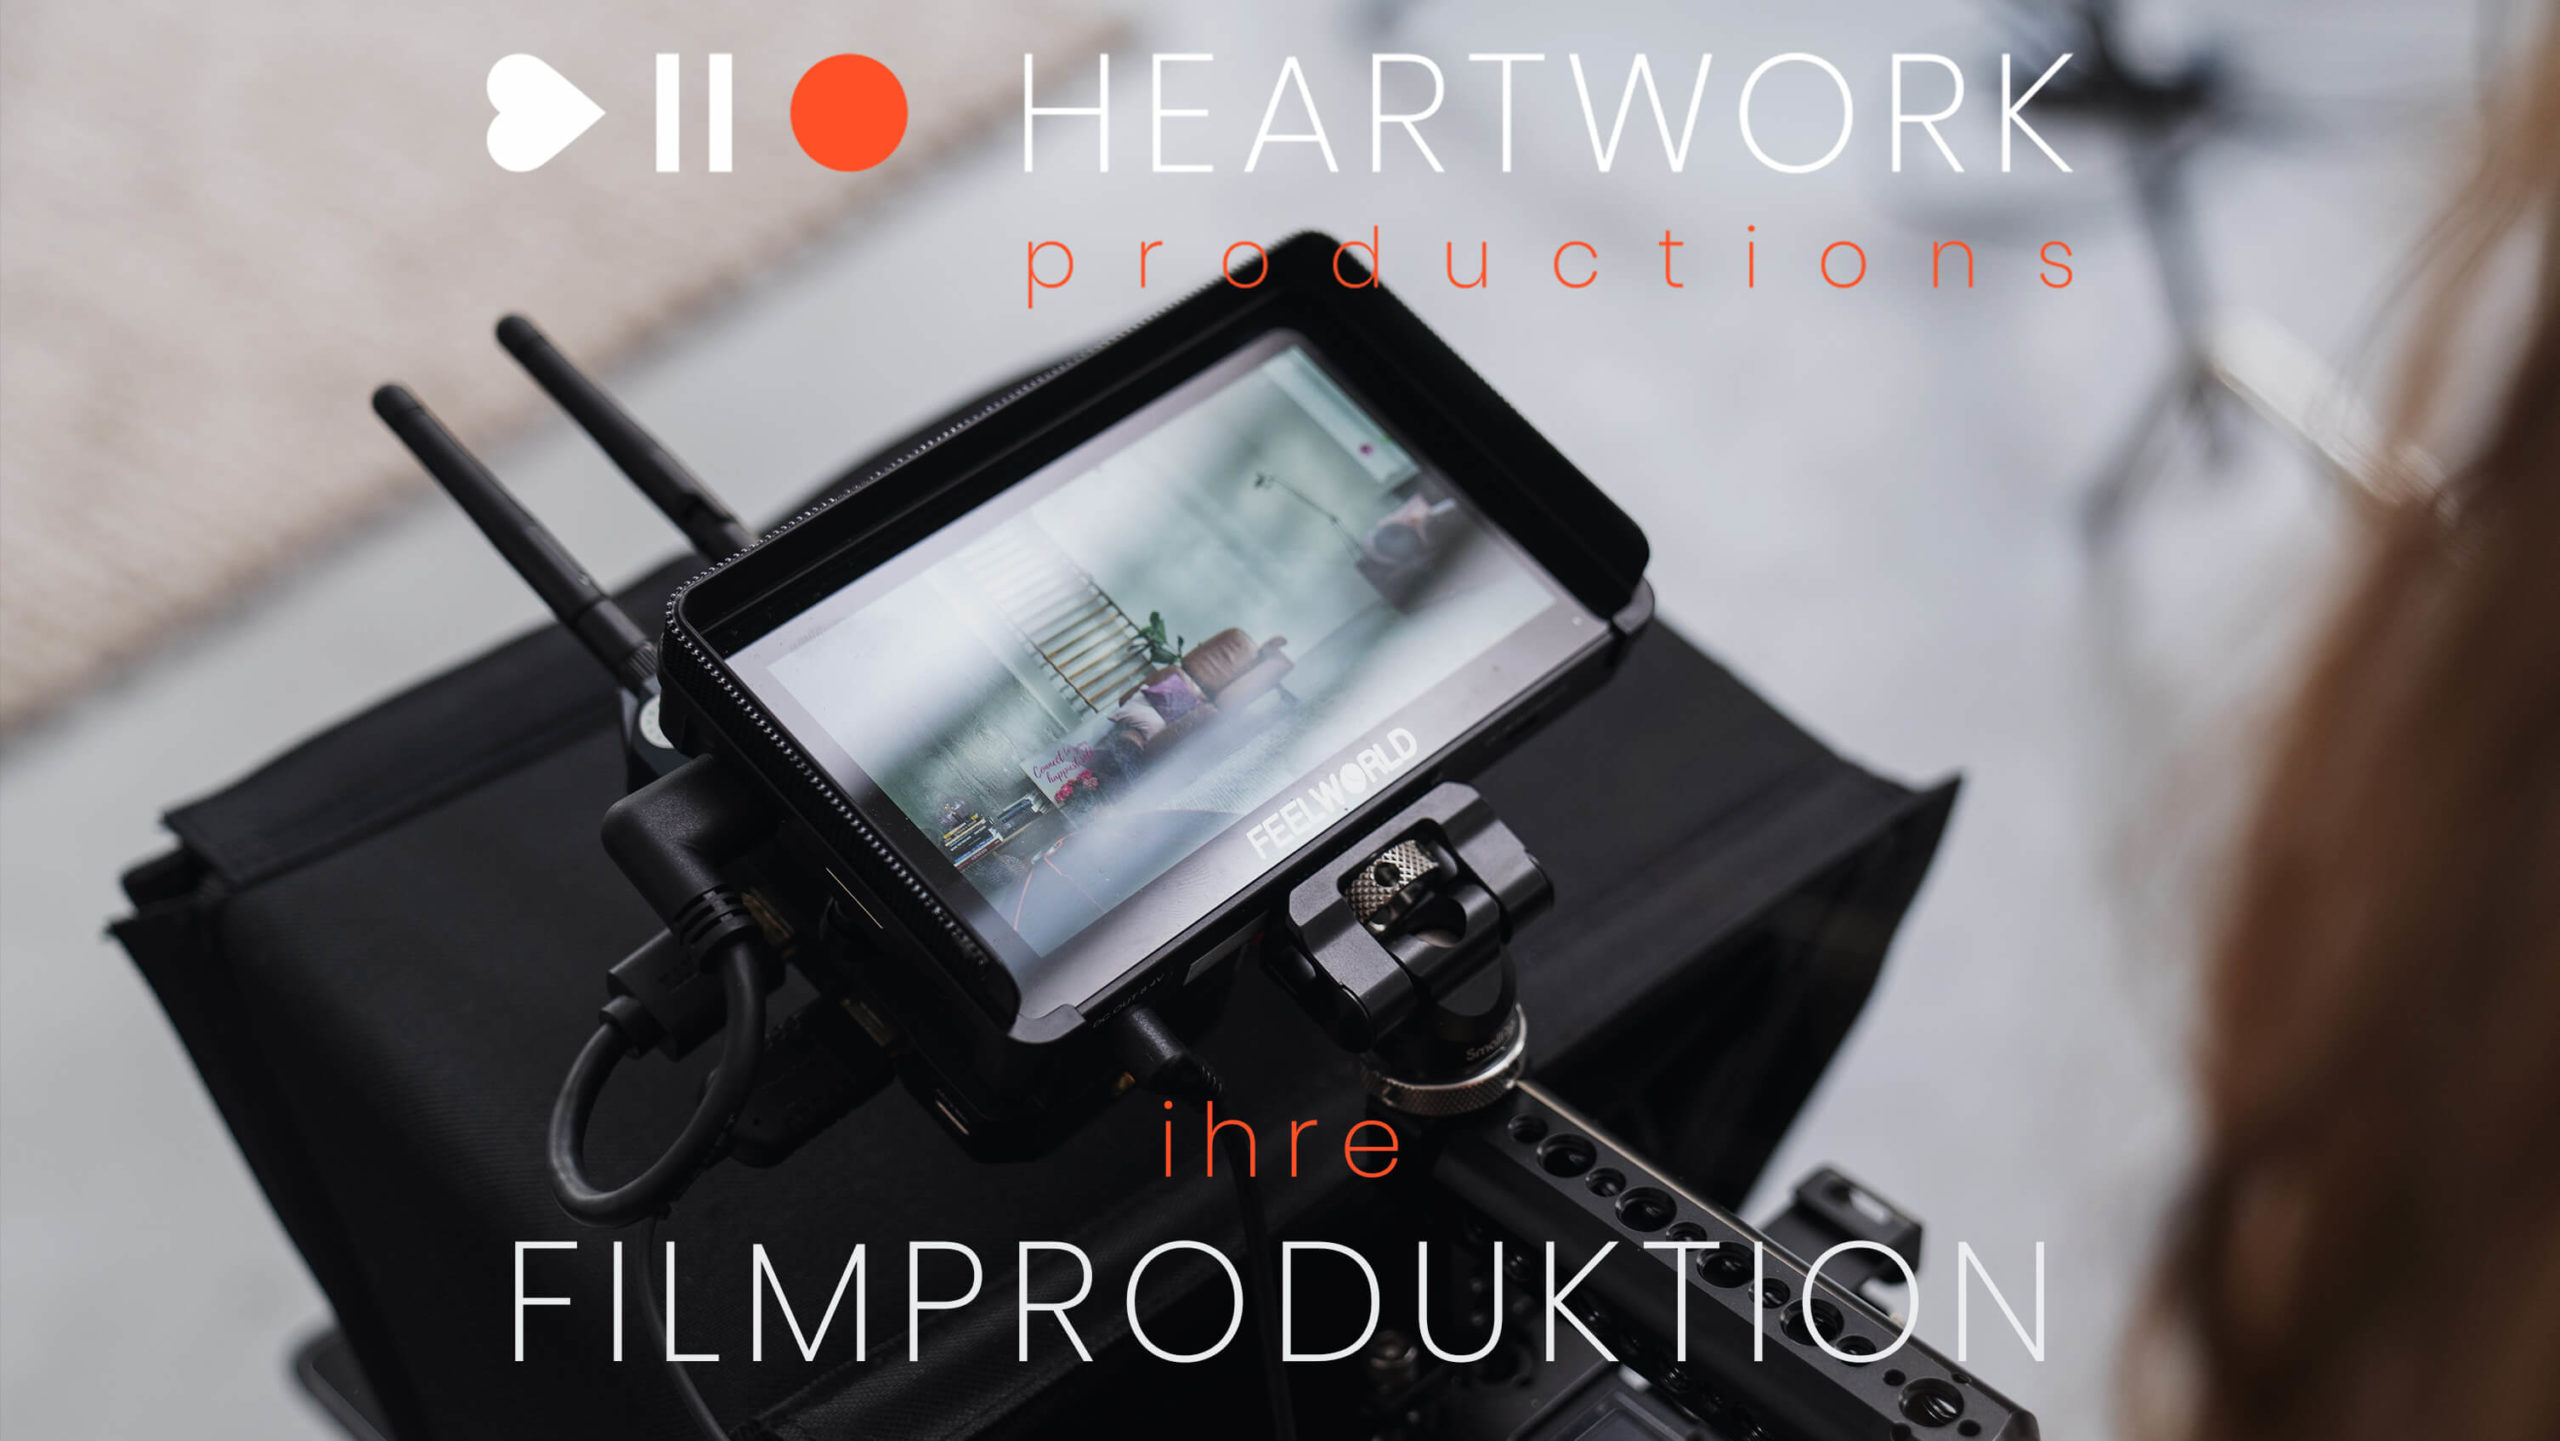 Heartwork Productions